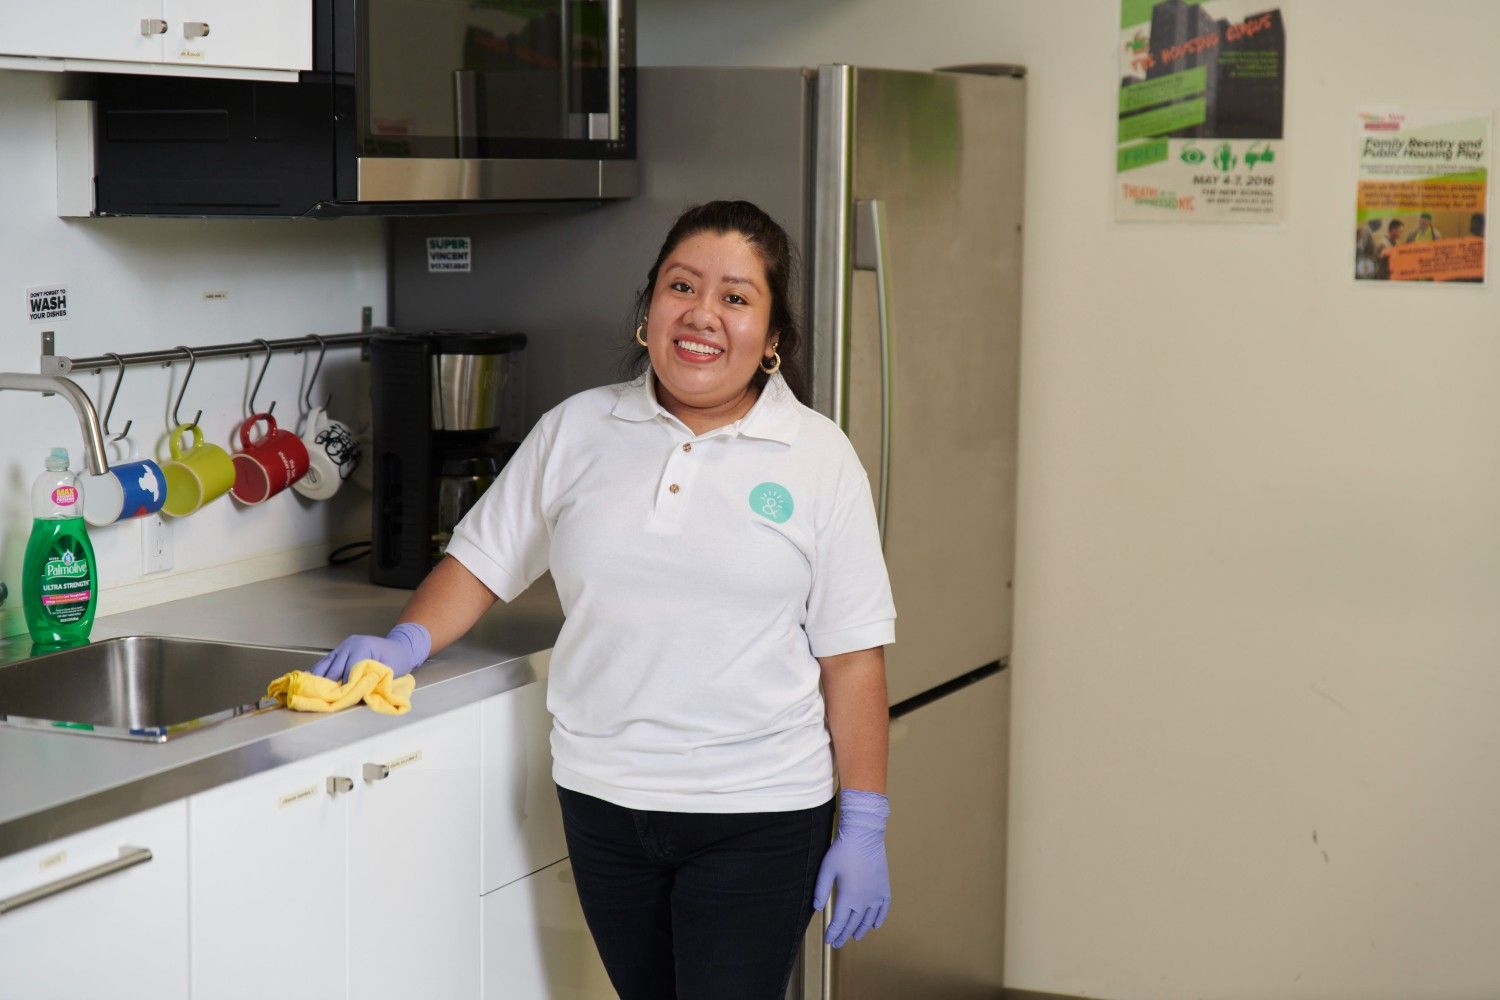 Aguilar stands in a kitchen facing the camera with cleaning gloves on.